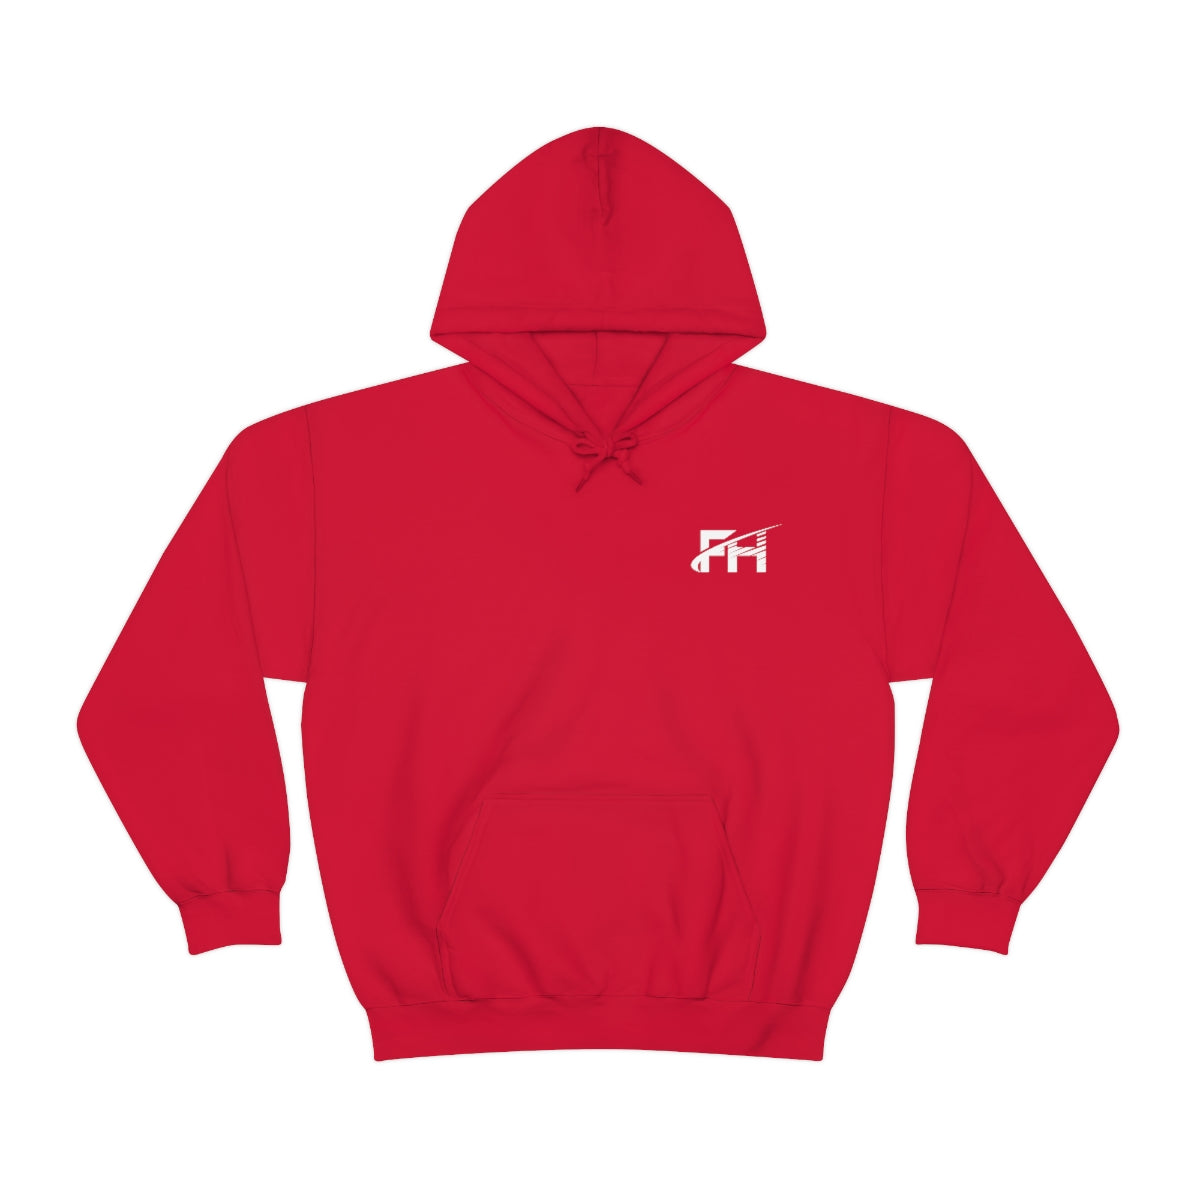 Farrell Hester "FH" Hoodie